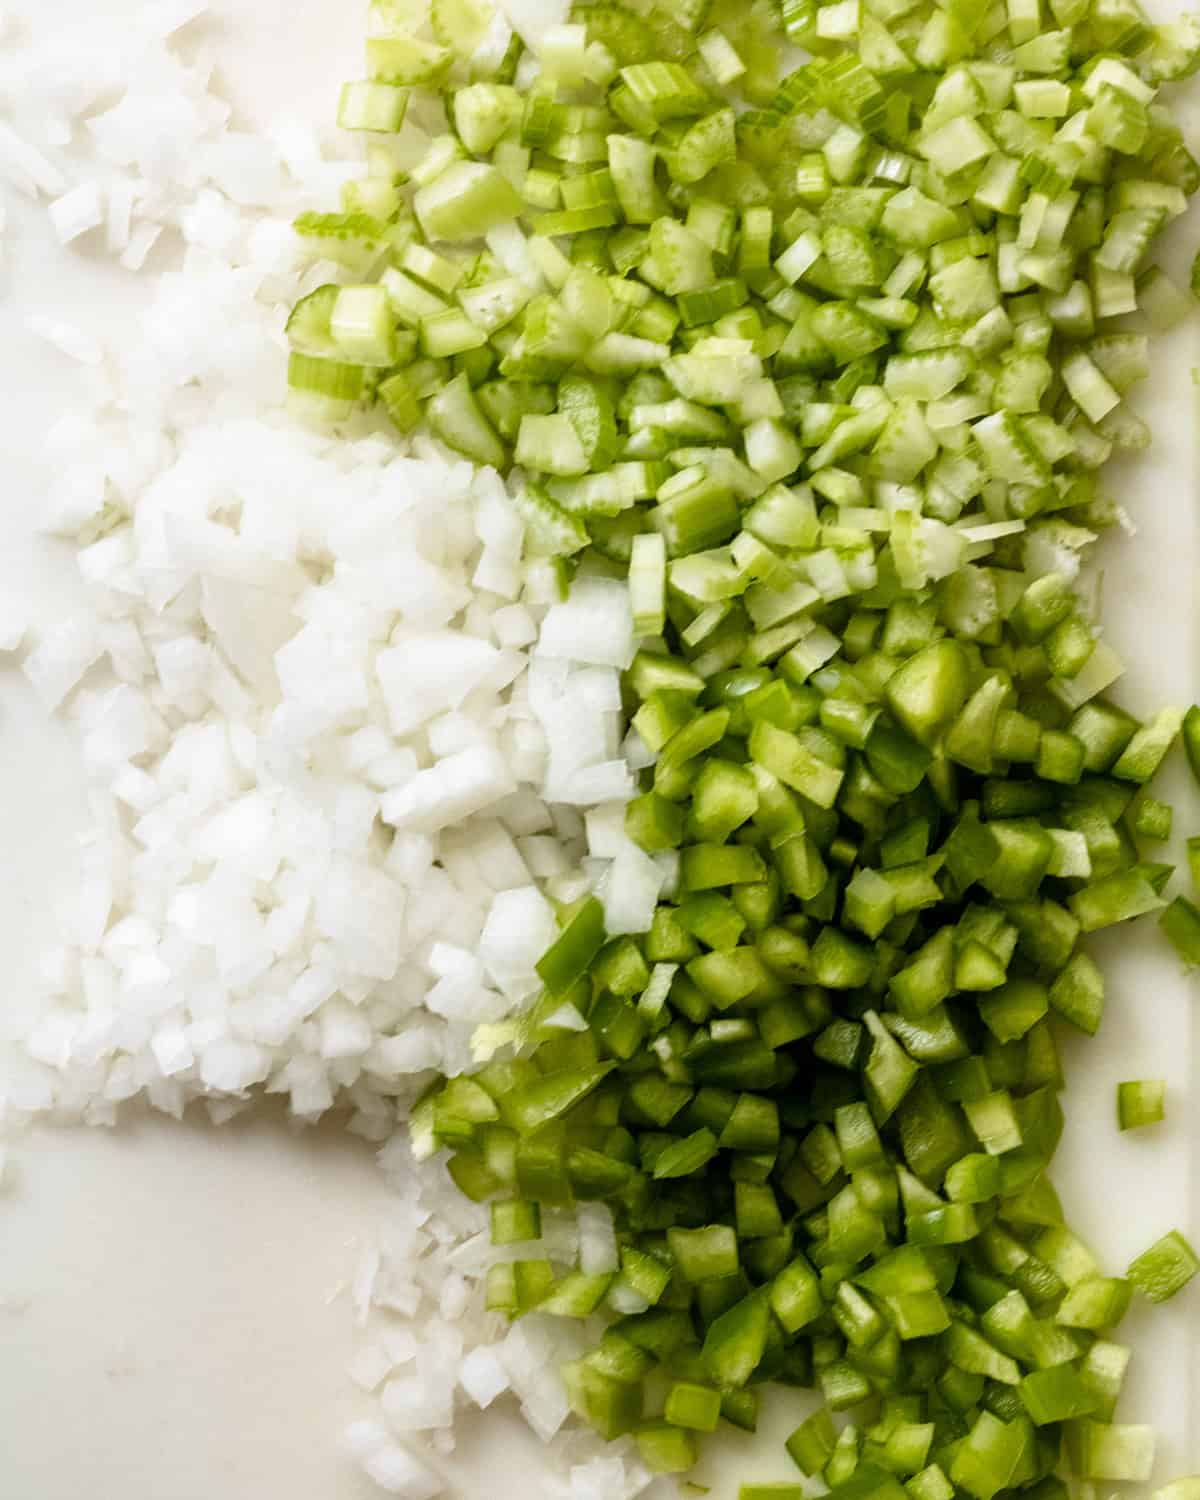 The Holy trinity: chopped onion, celery, and green bell pepper.